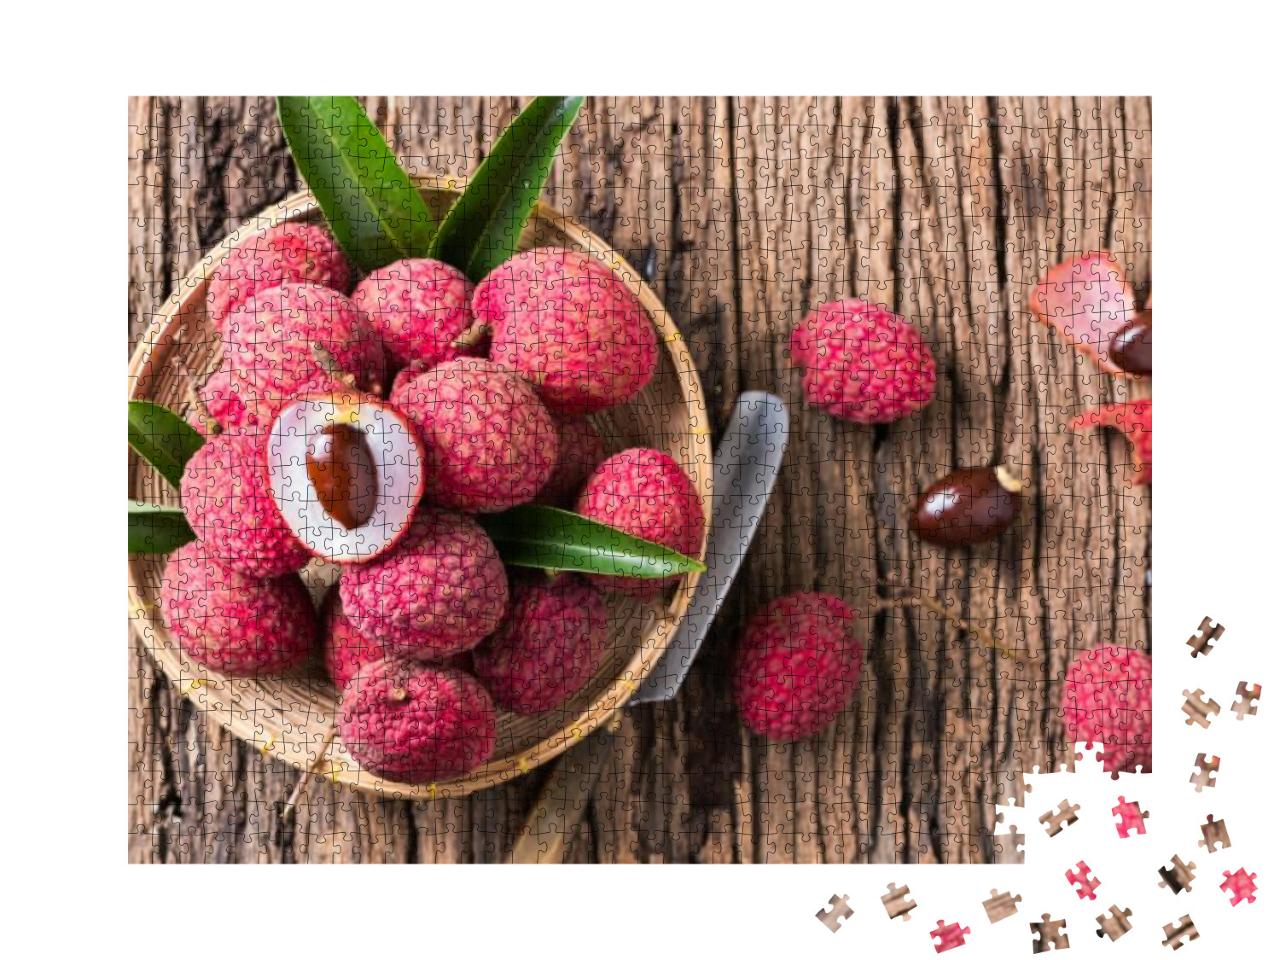 Fresh Organic Lychee Fruit on Bamboo Basket & Old Wood Ba... Jigsaw Puzzle with 1000 pieces